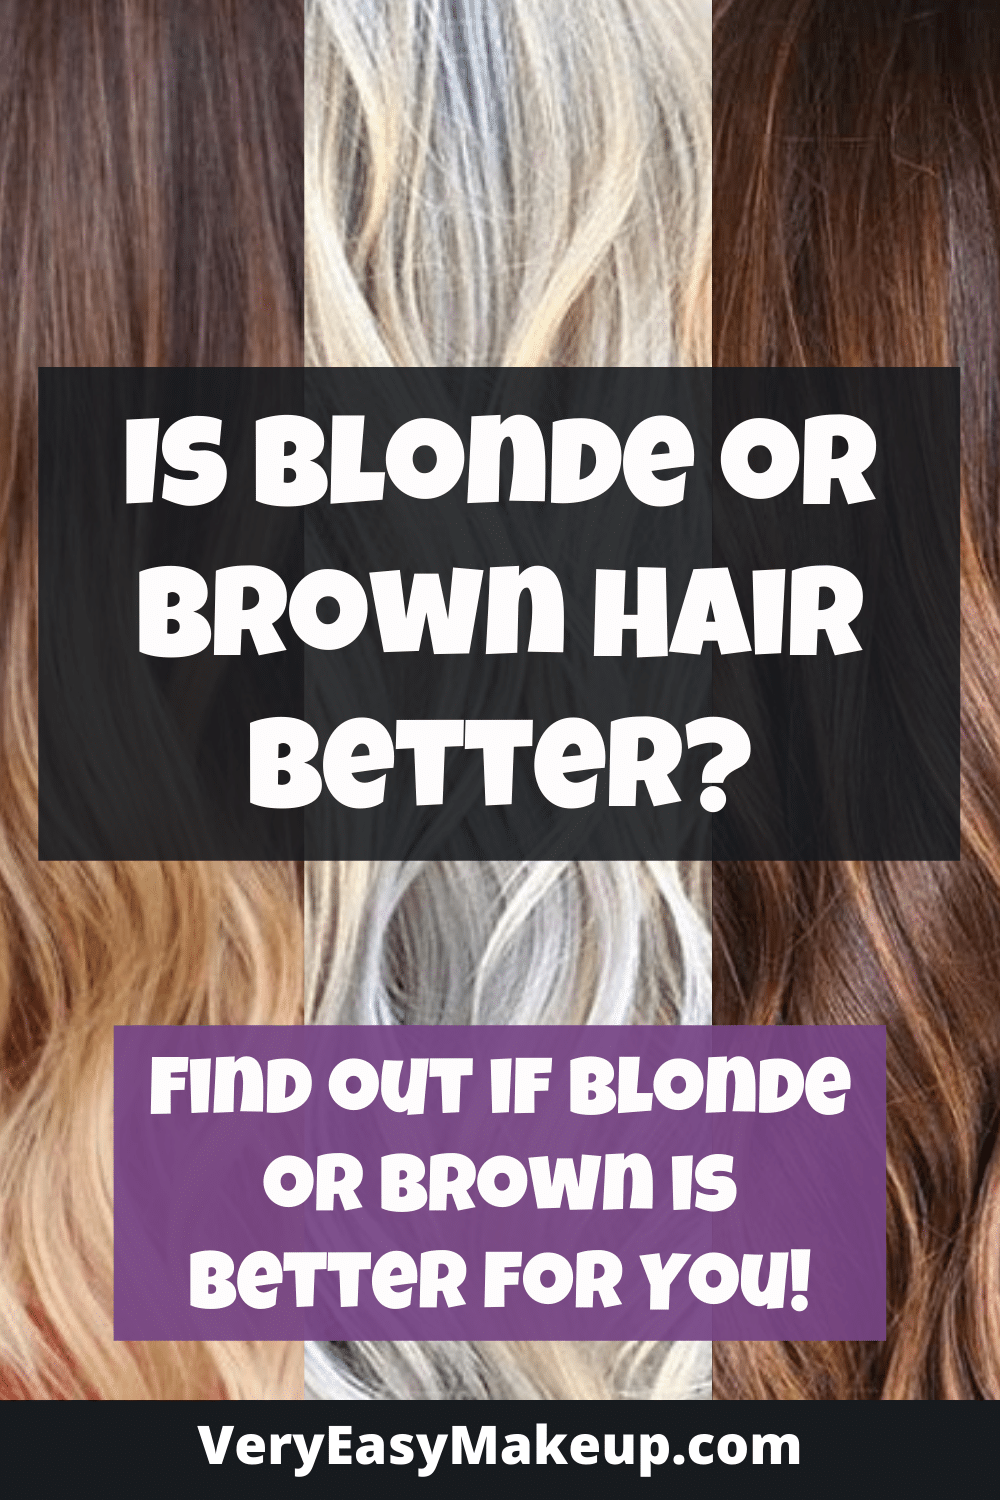 is blonde or brown hair better for you and more attractive by Very Easy Makeup